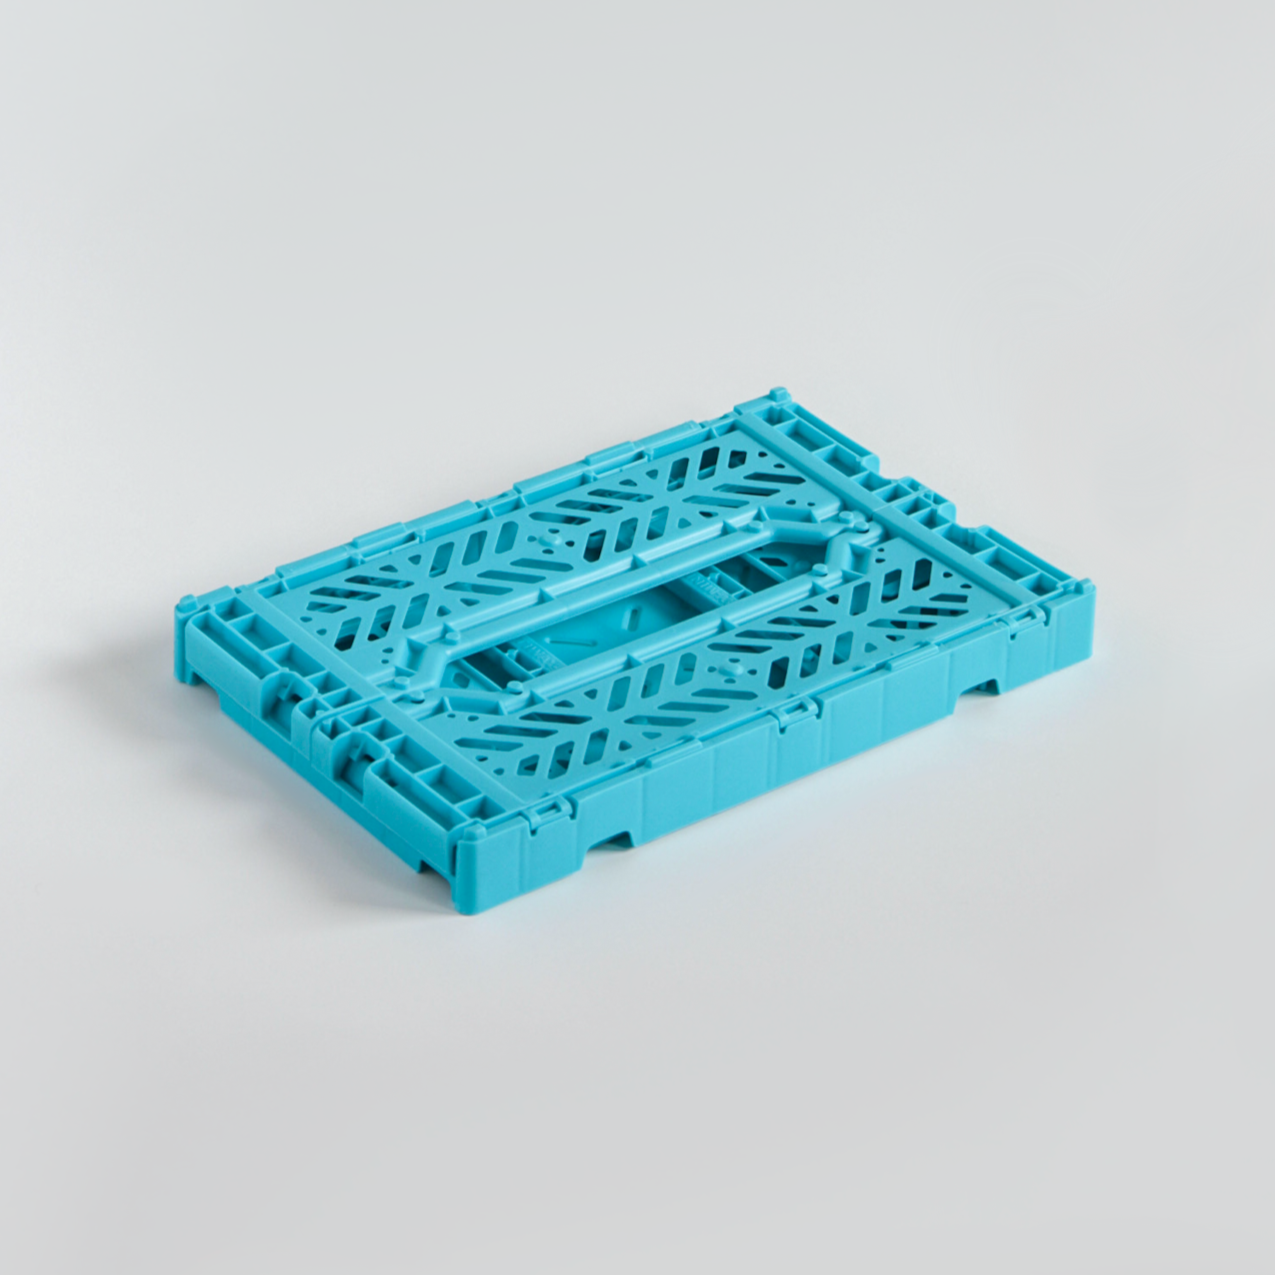 Colour Crate - Turquoise